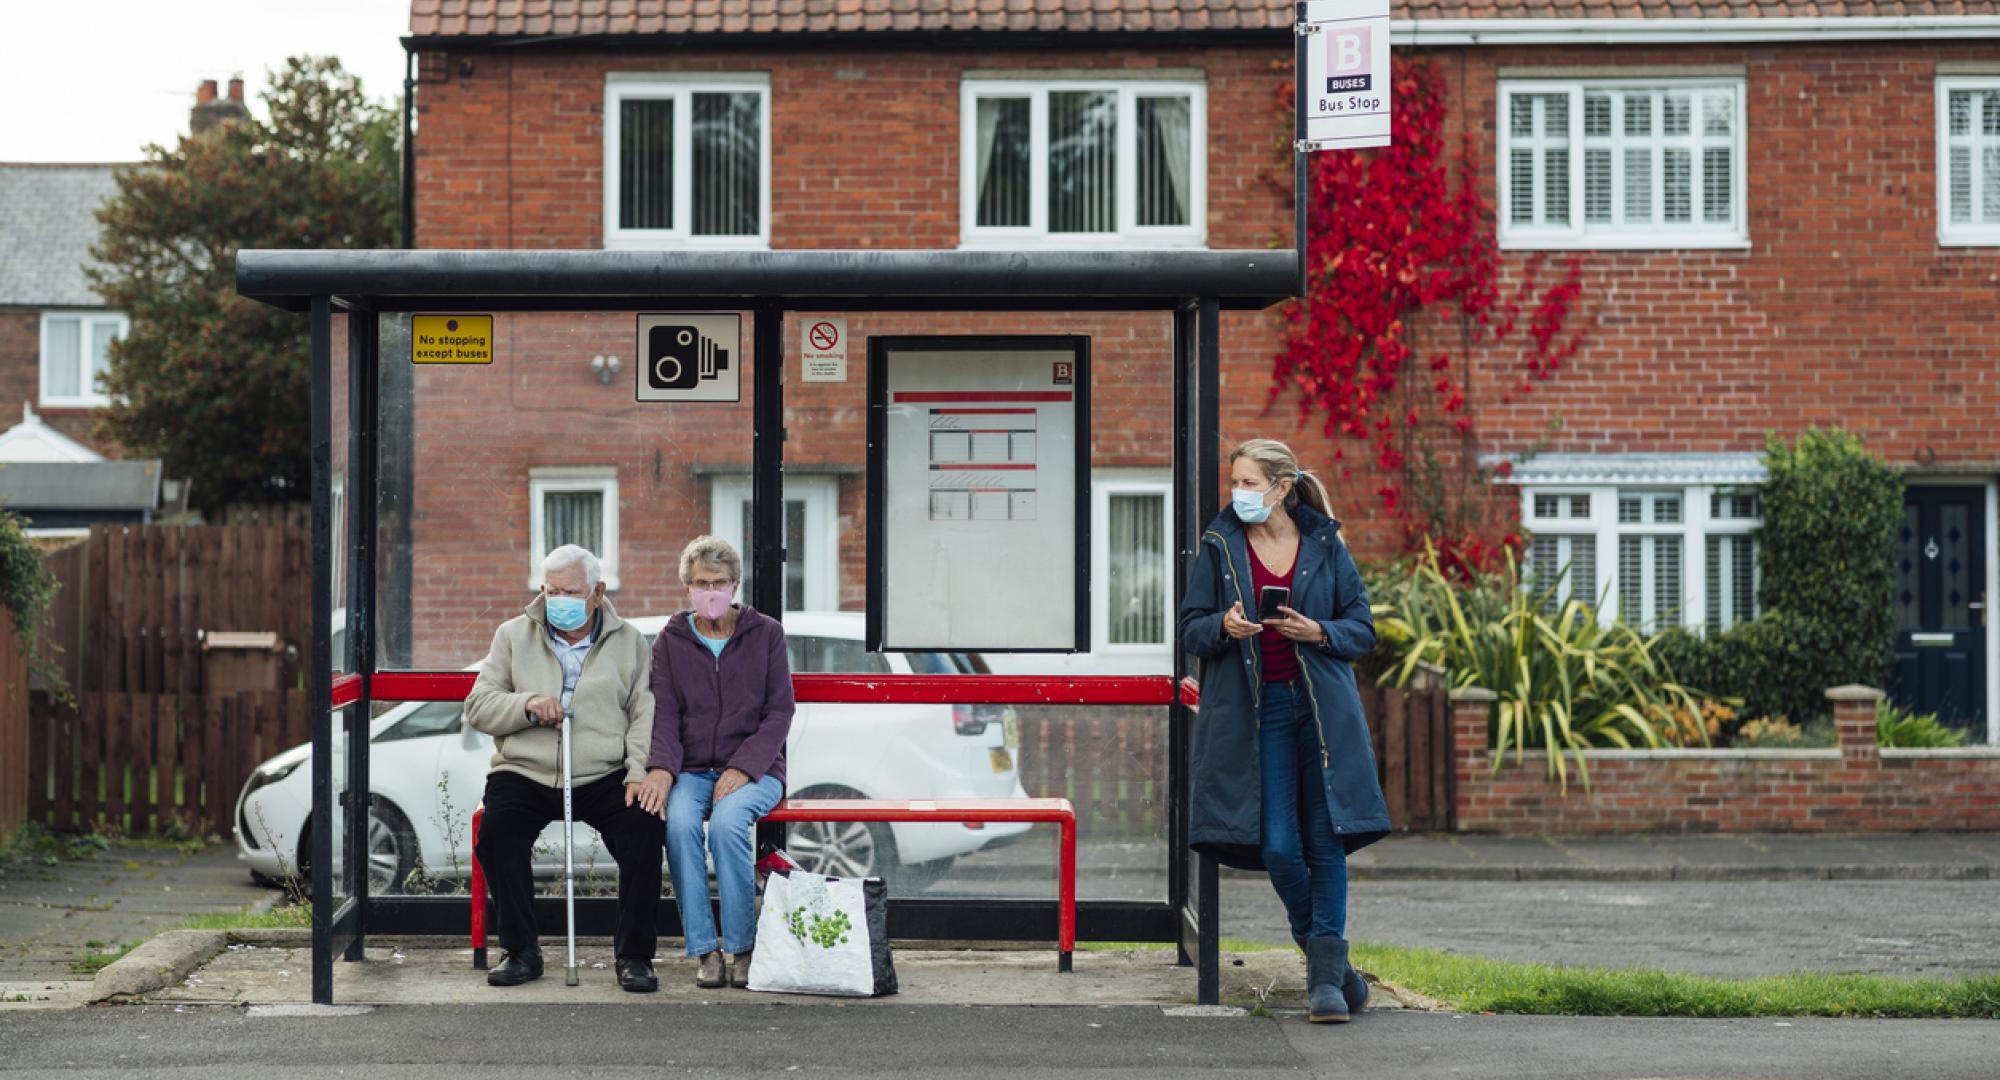 Bus stop in England